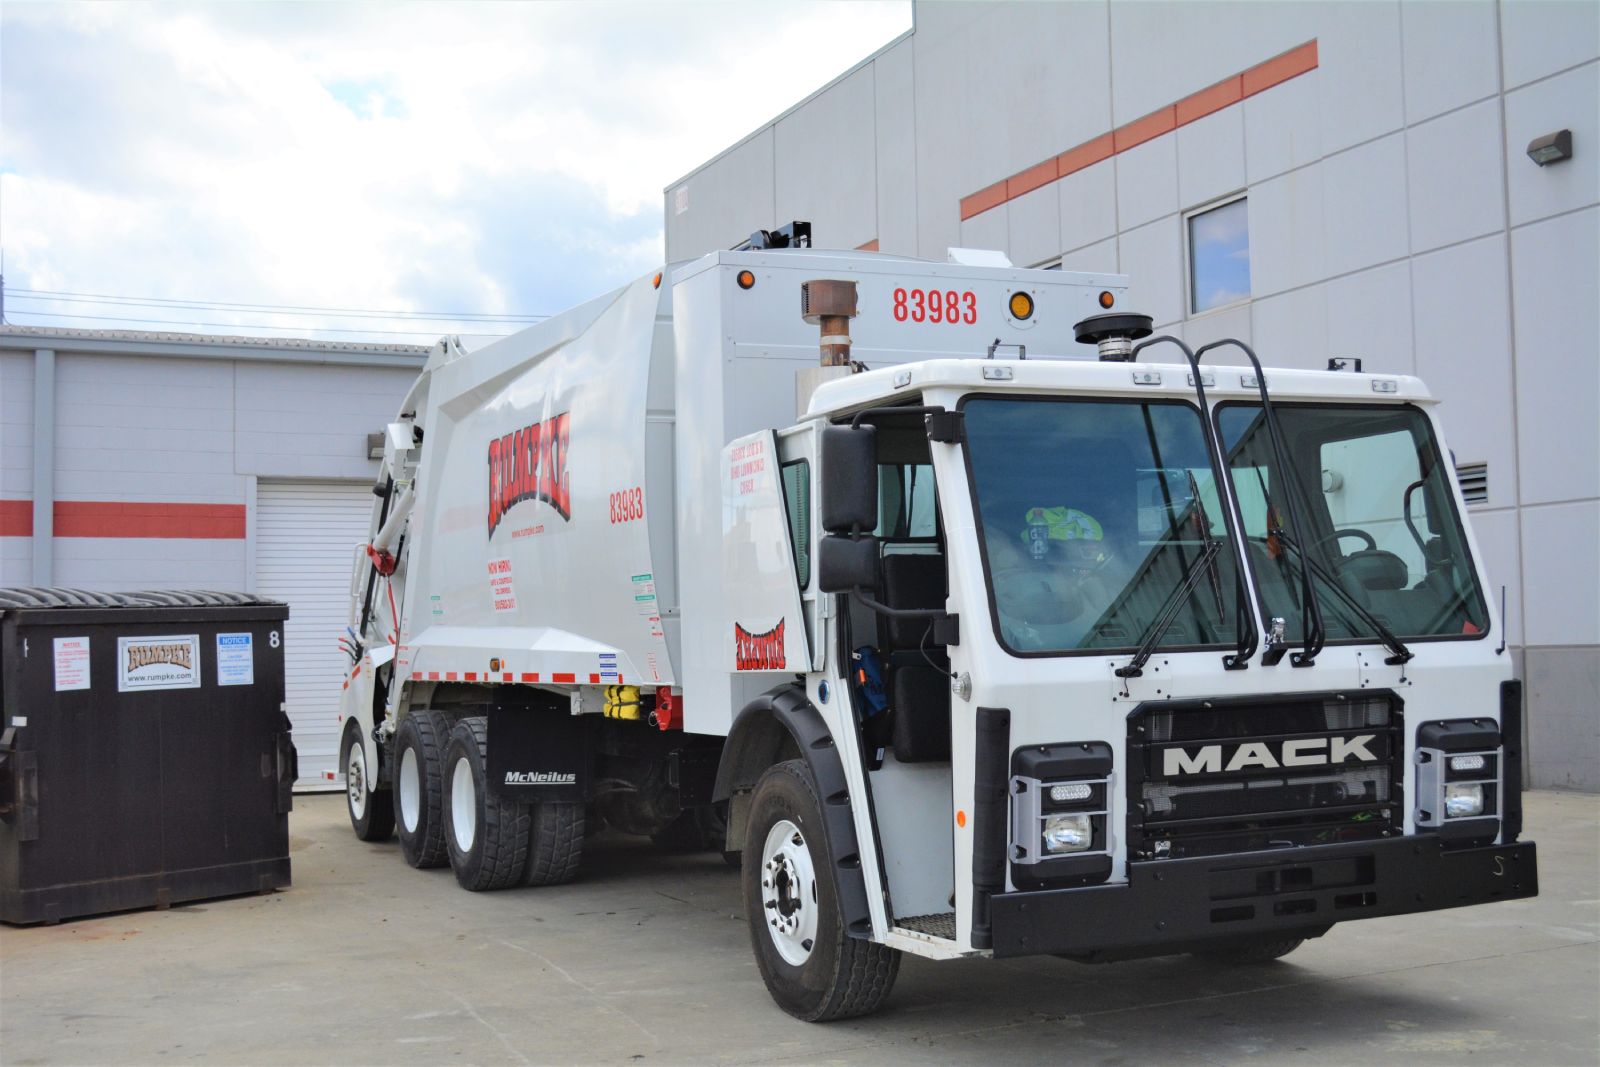 Rumpke Truck And Dumpster For Commercial Trash Pickup Services